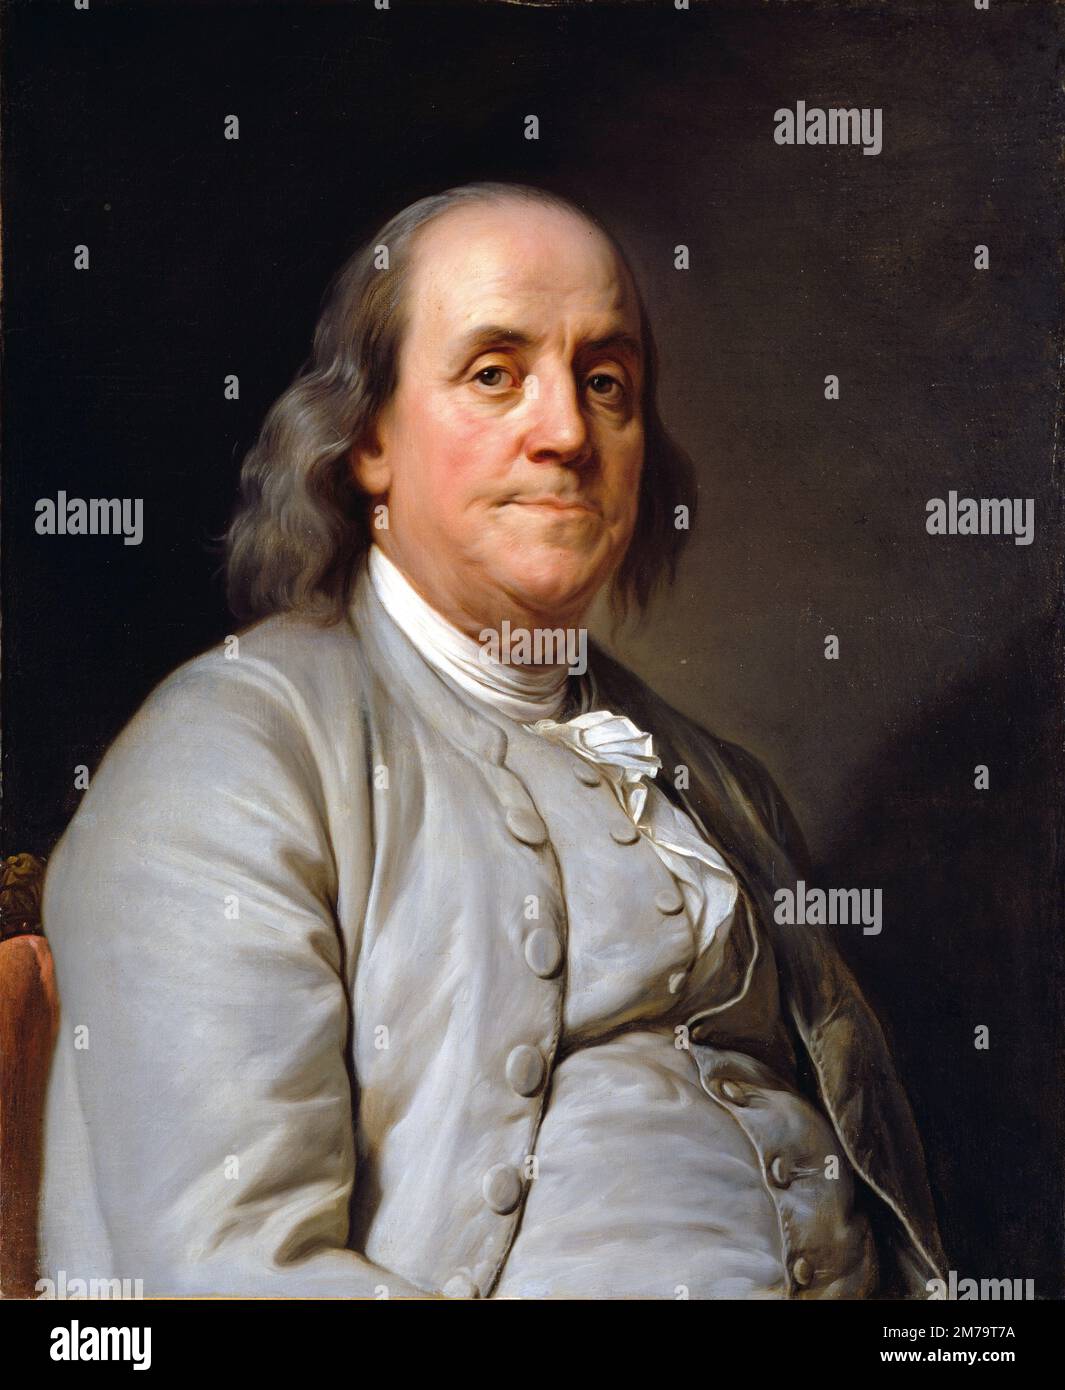 Benjamin Franklin, 1778, Benjamin Franklin (1706-90) American statesman, printer and scientist. Benjamin Franklin, one of the Founding Fathers of the United States. By Joseph-Siffred Duplessis Stock Photo